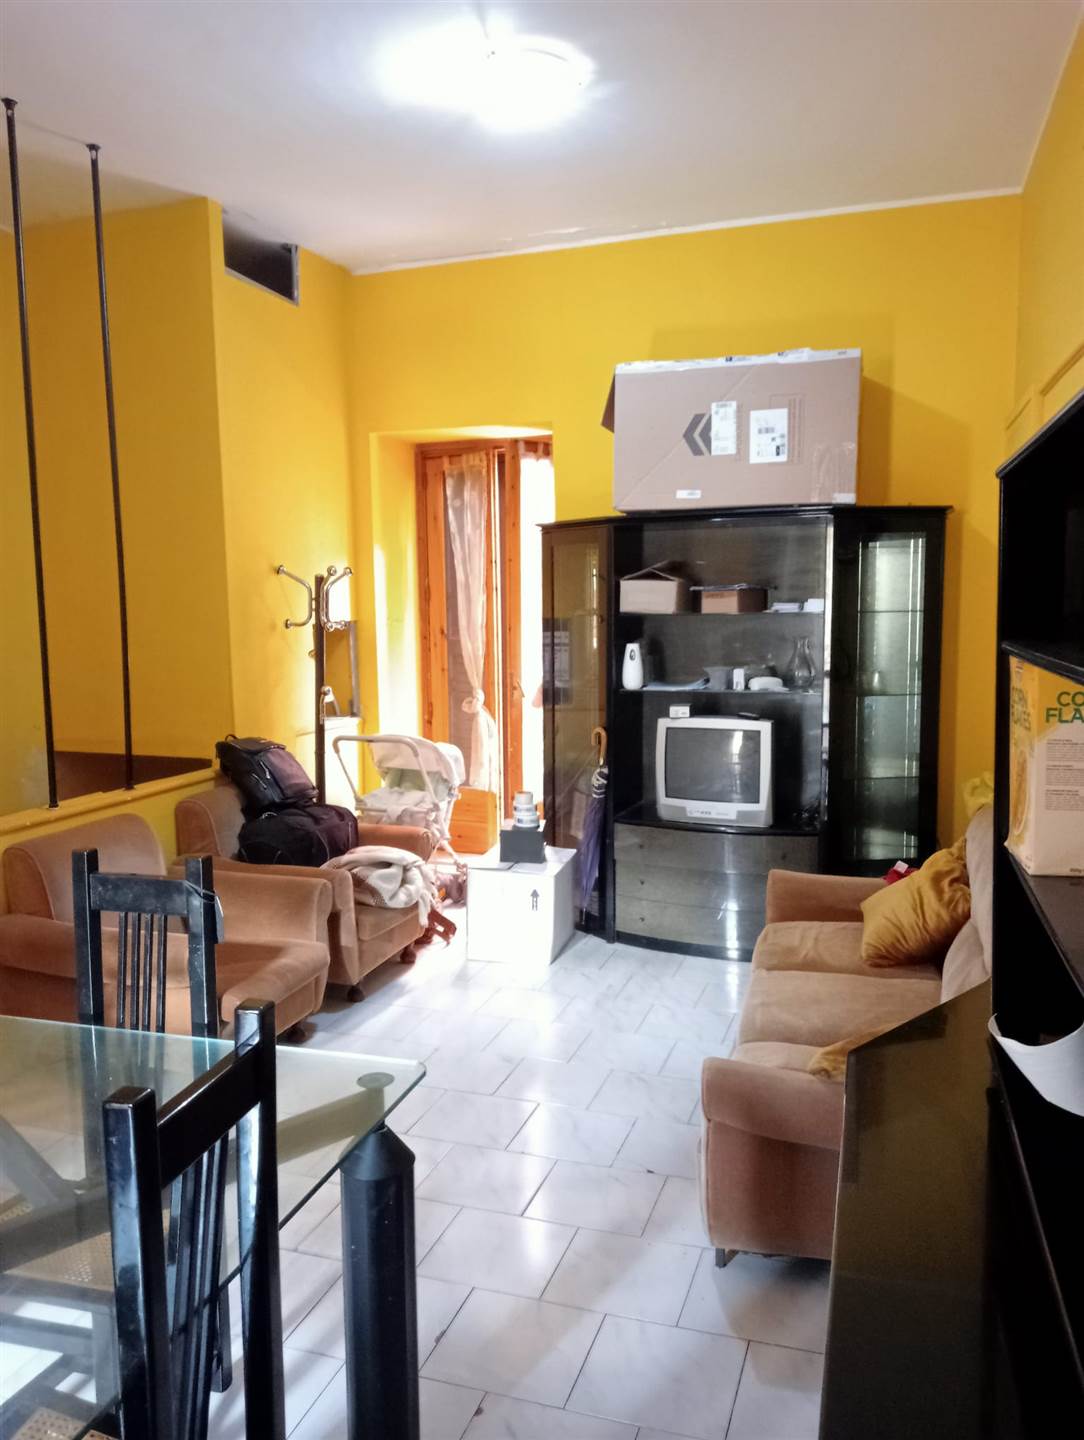 CENTRO, LICATA, Apartment for sale of 60 Sq. mt., Habitable, Energetic class: G, composed by: 2 Rooms, Separate kitchen, 2 Bedrooms, 1 Bathroom, 